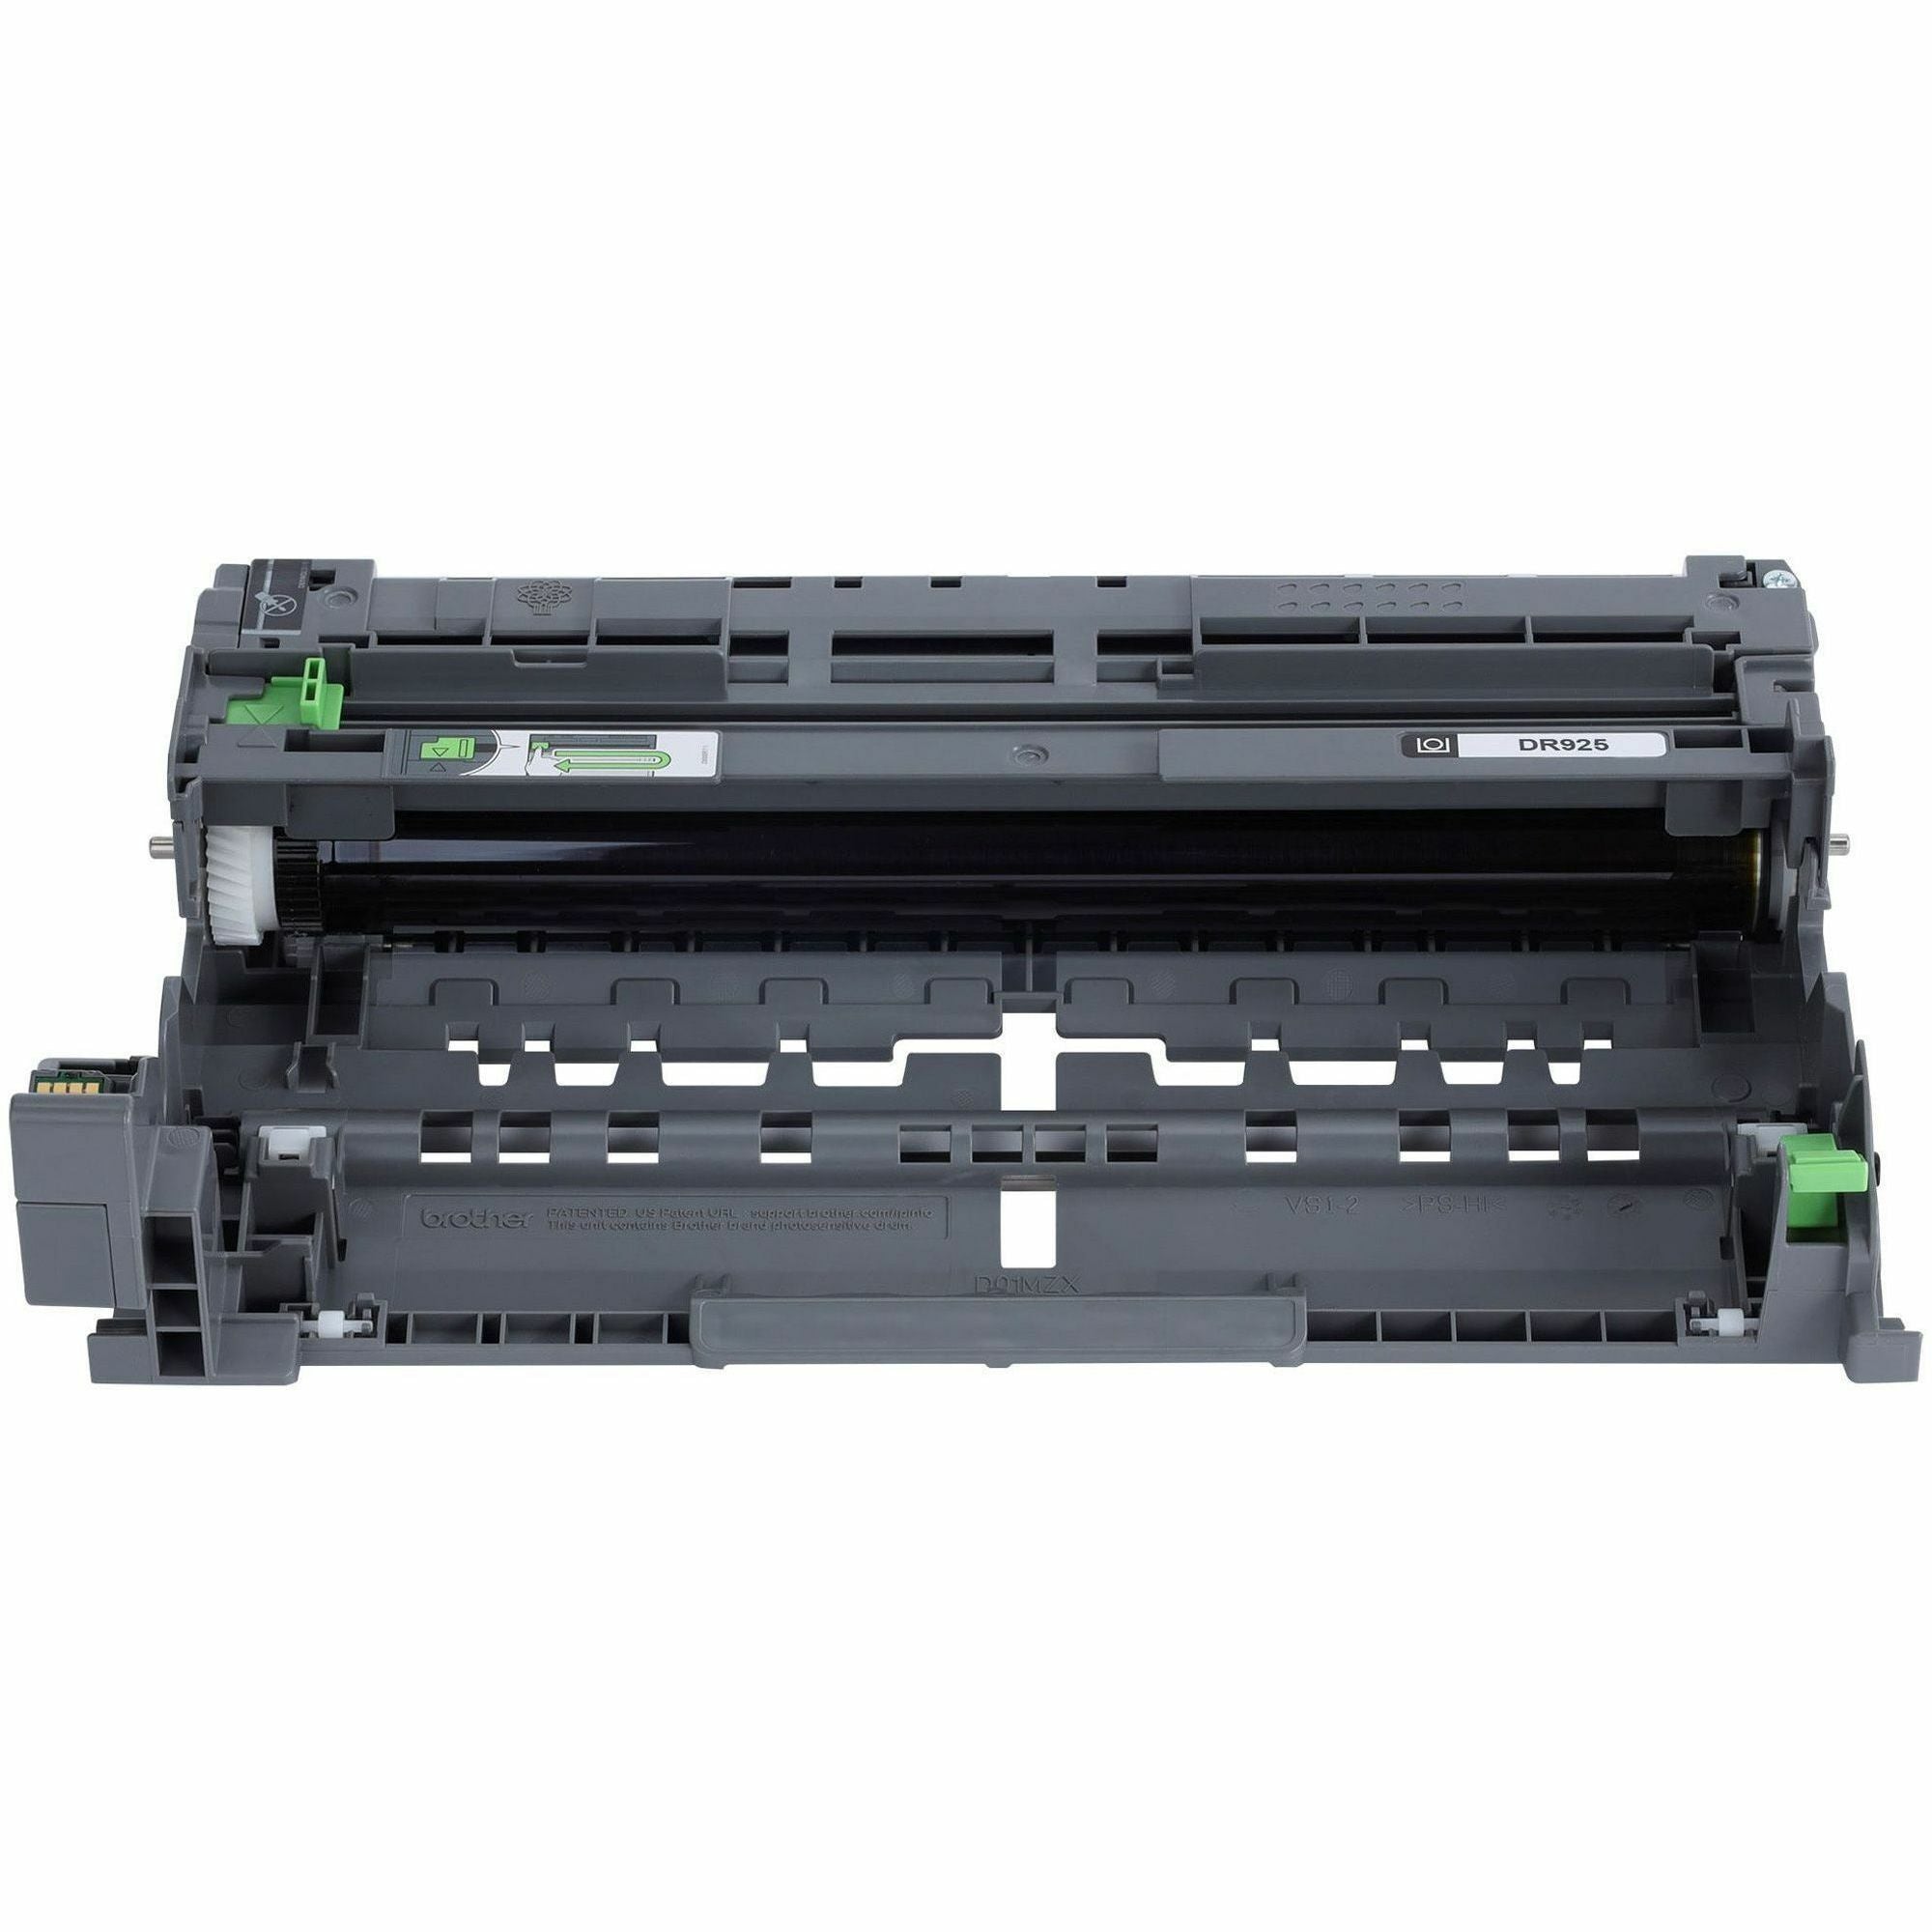 brother-drum-unit-laser-print-technology-75000-pages_brtdr925 - 2